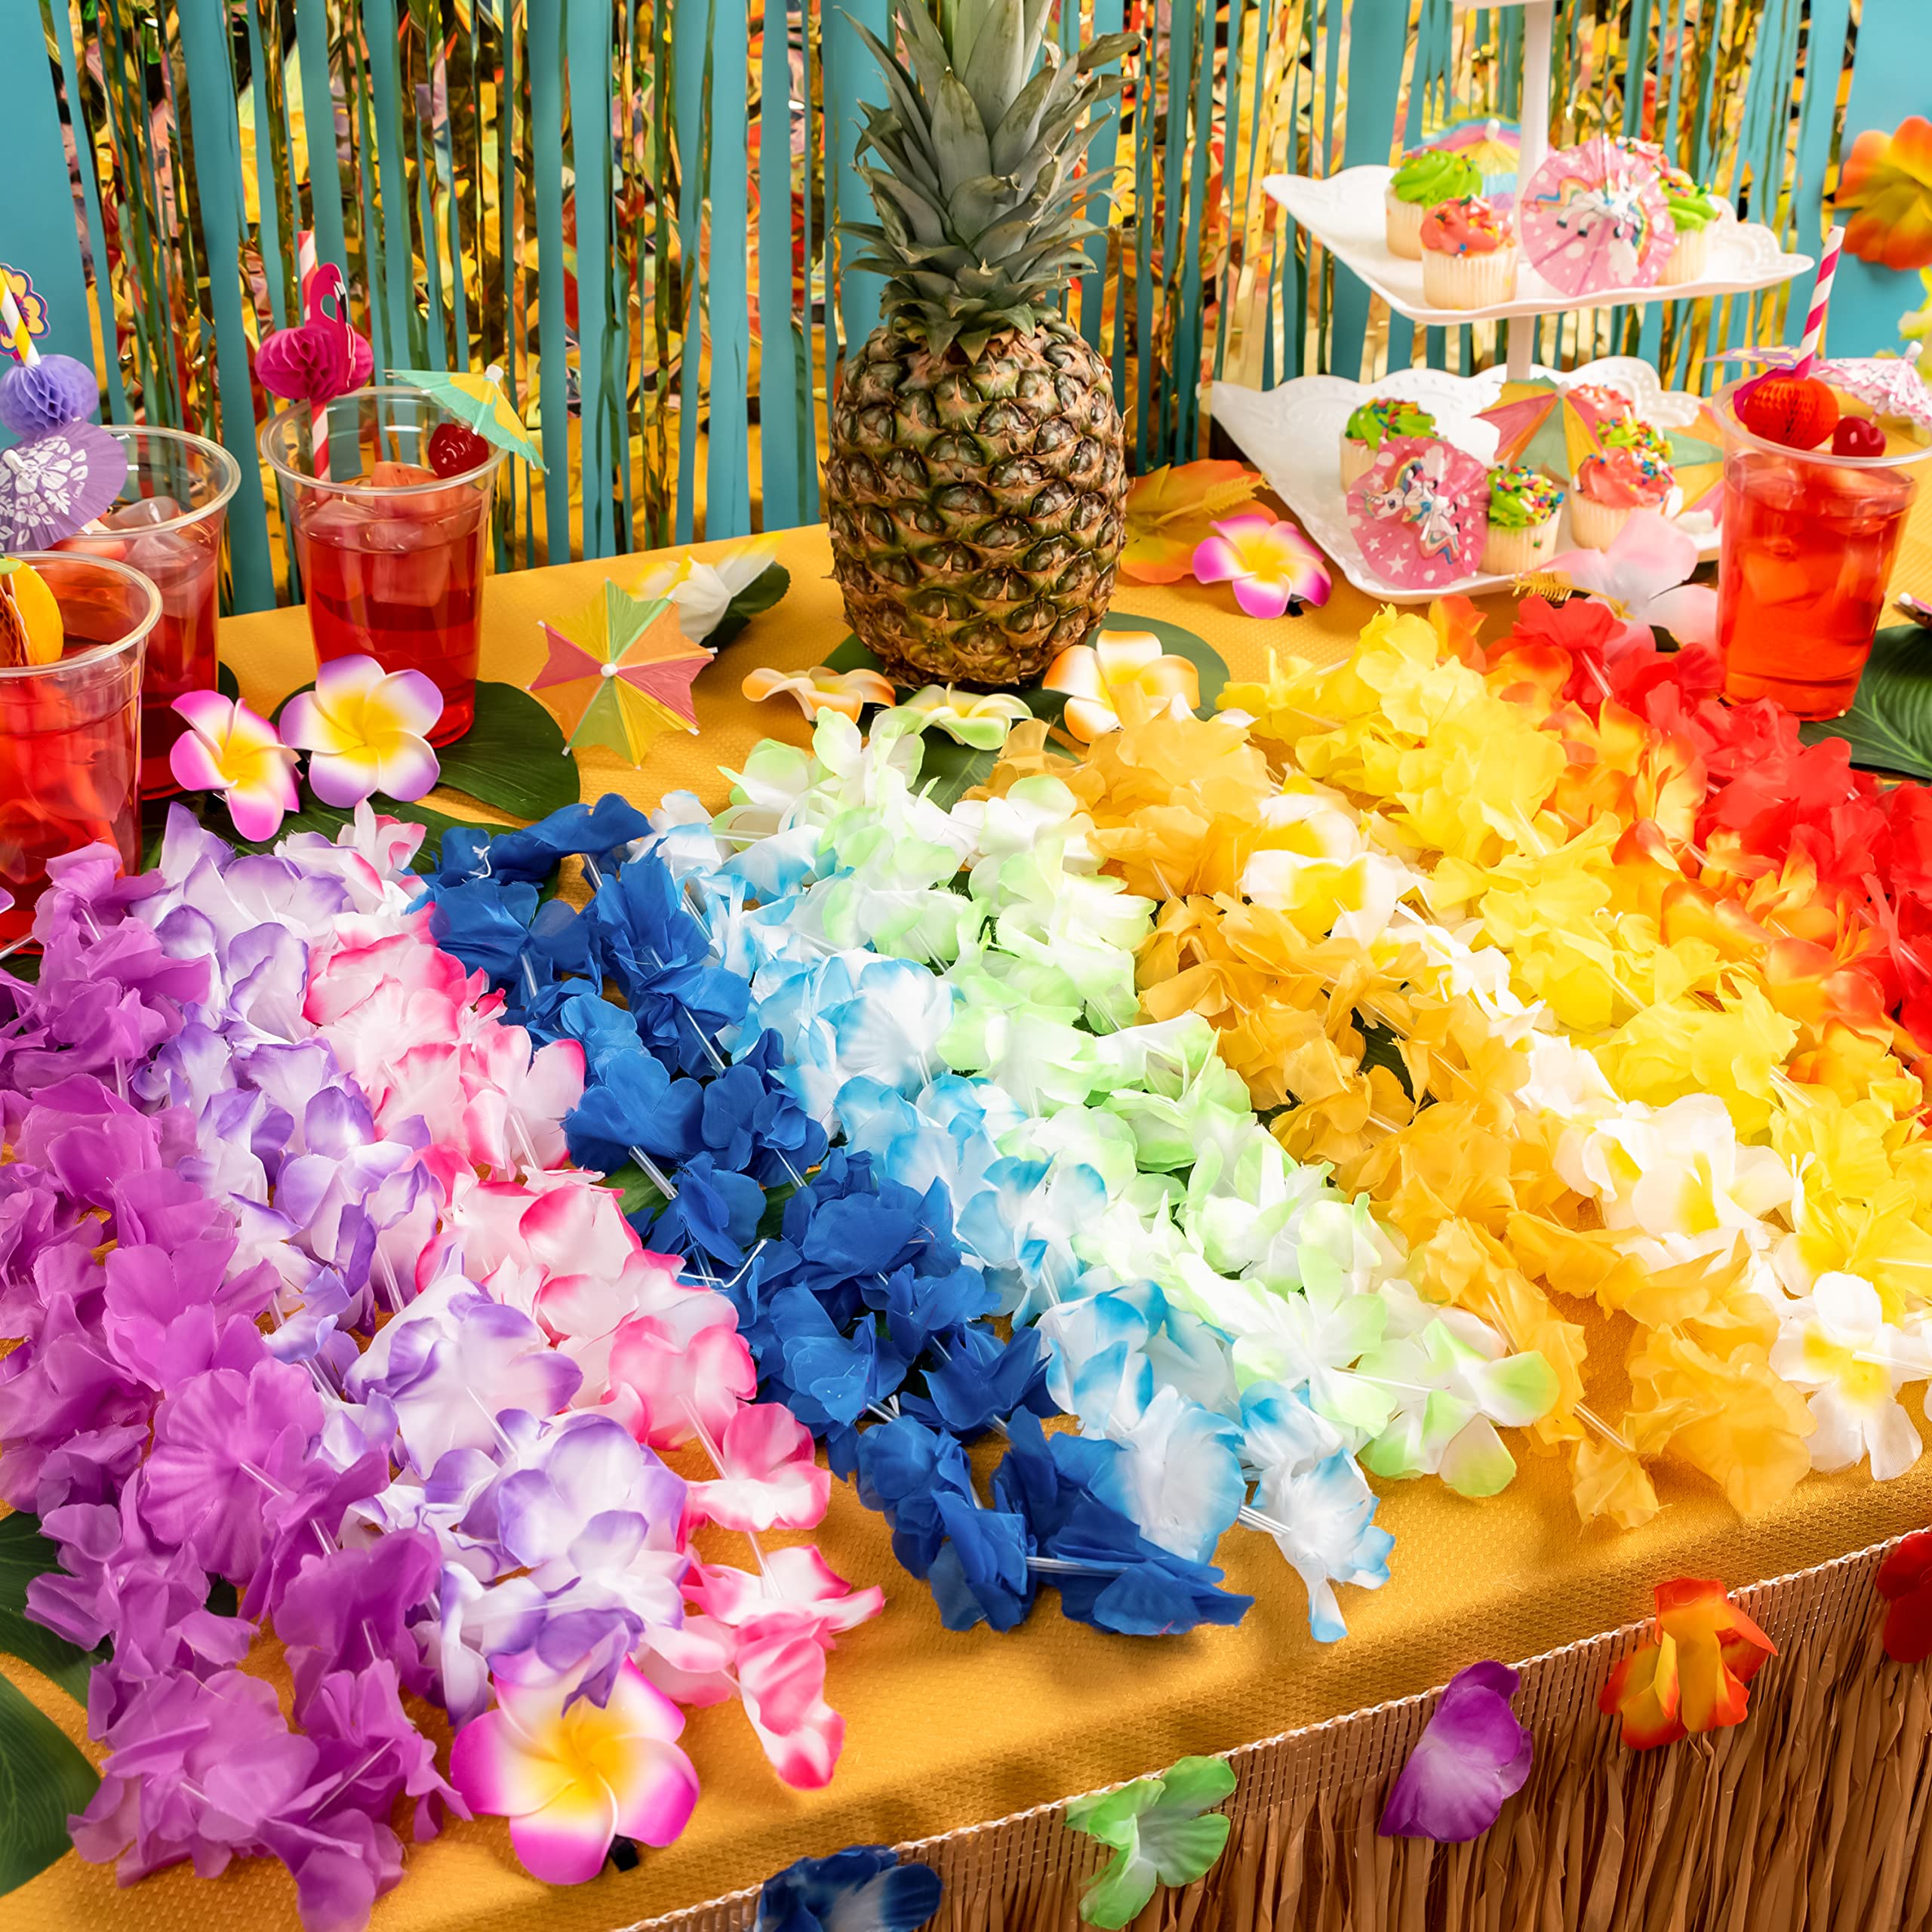 Syncfun 36 Pcs Hawaiian Leis Bulk, Flower Leis Luau Party Decorations Wedding Favors Holiday Silly String Beach Birthday Party Supplies - image 5 of 8